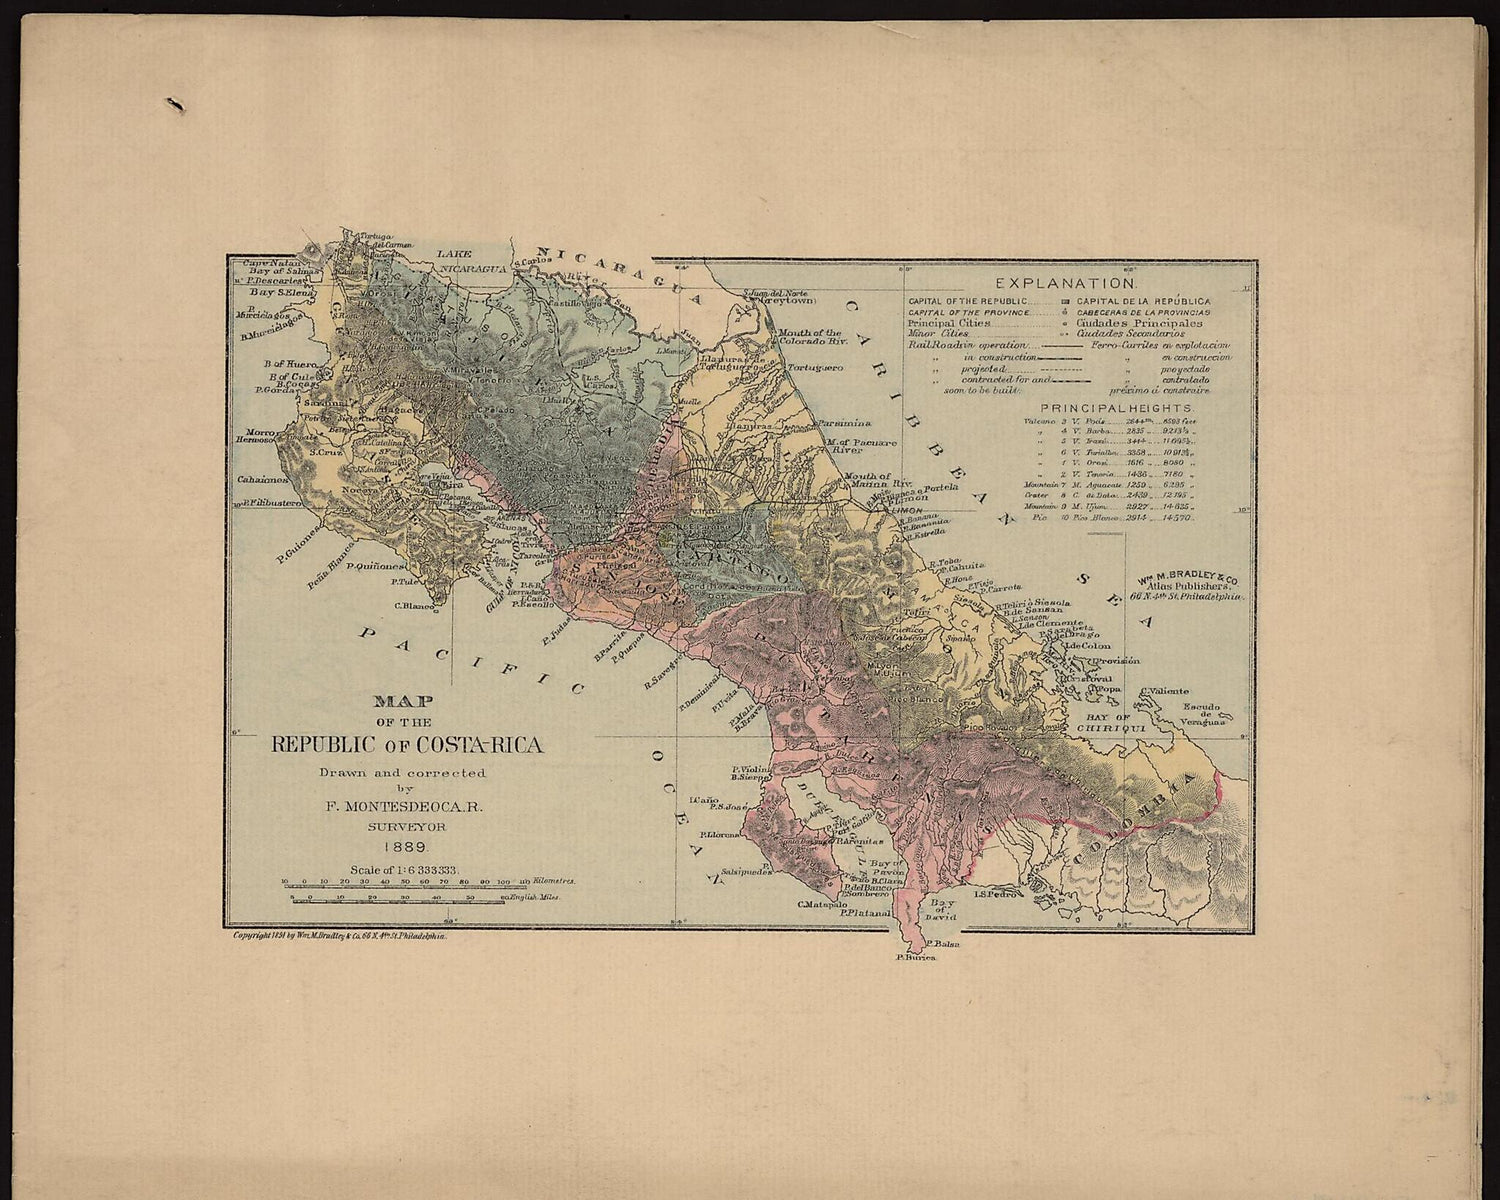 This old map of Map of the Republic of Costa Rica from 1891 was created by Faustino Montes De Oca Ramirez in 1891